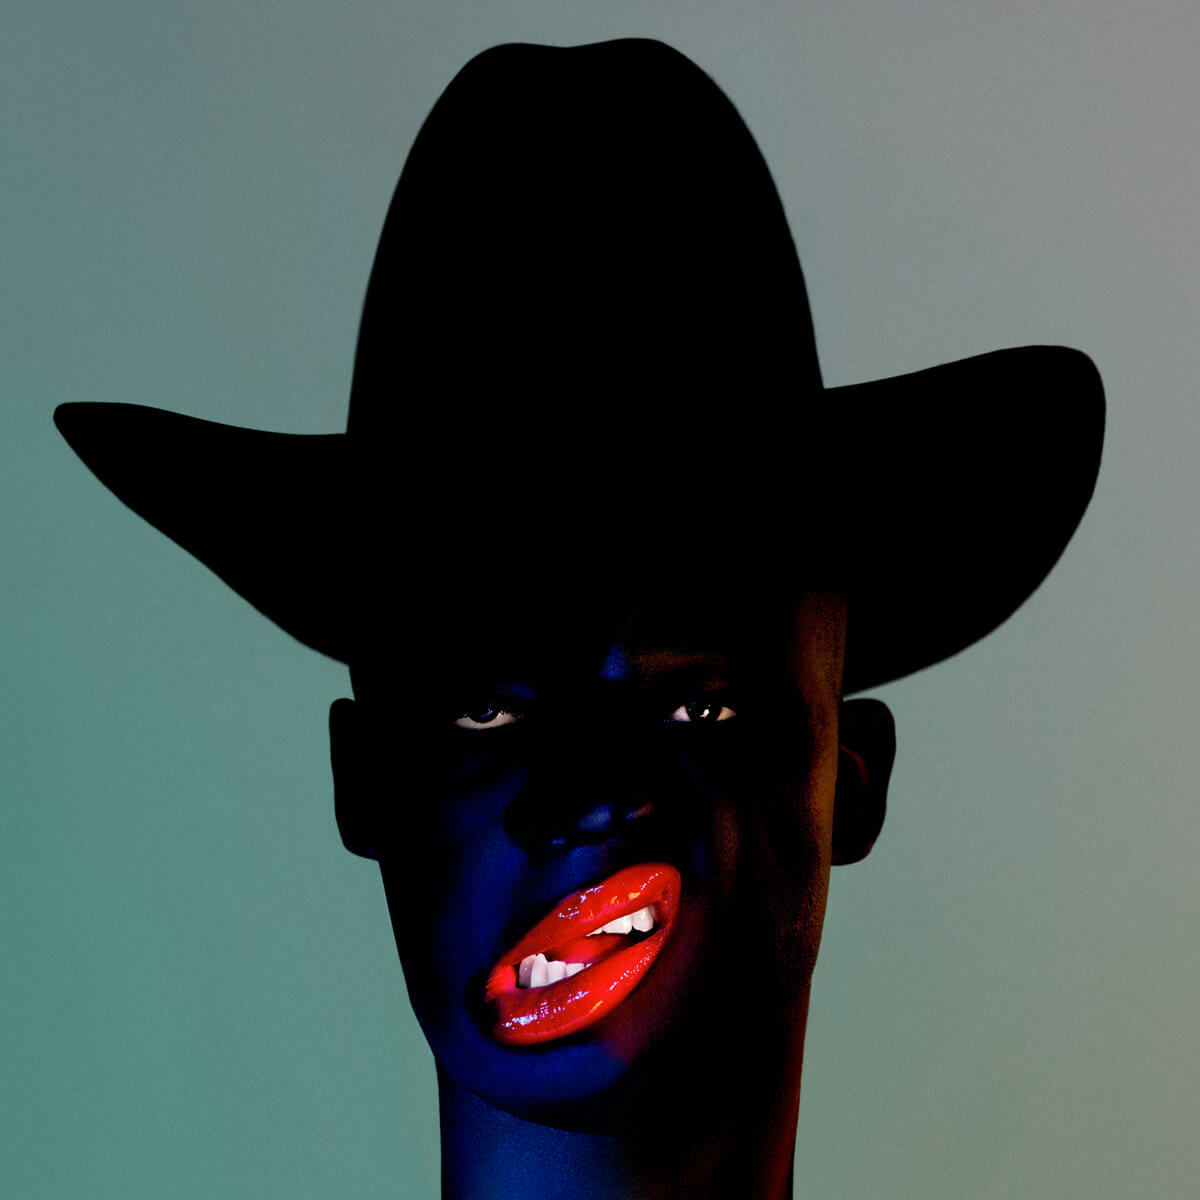 Cocoa sugar, Young Fathers